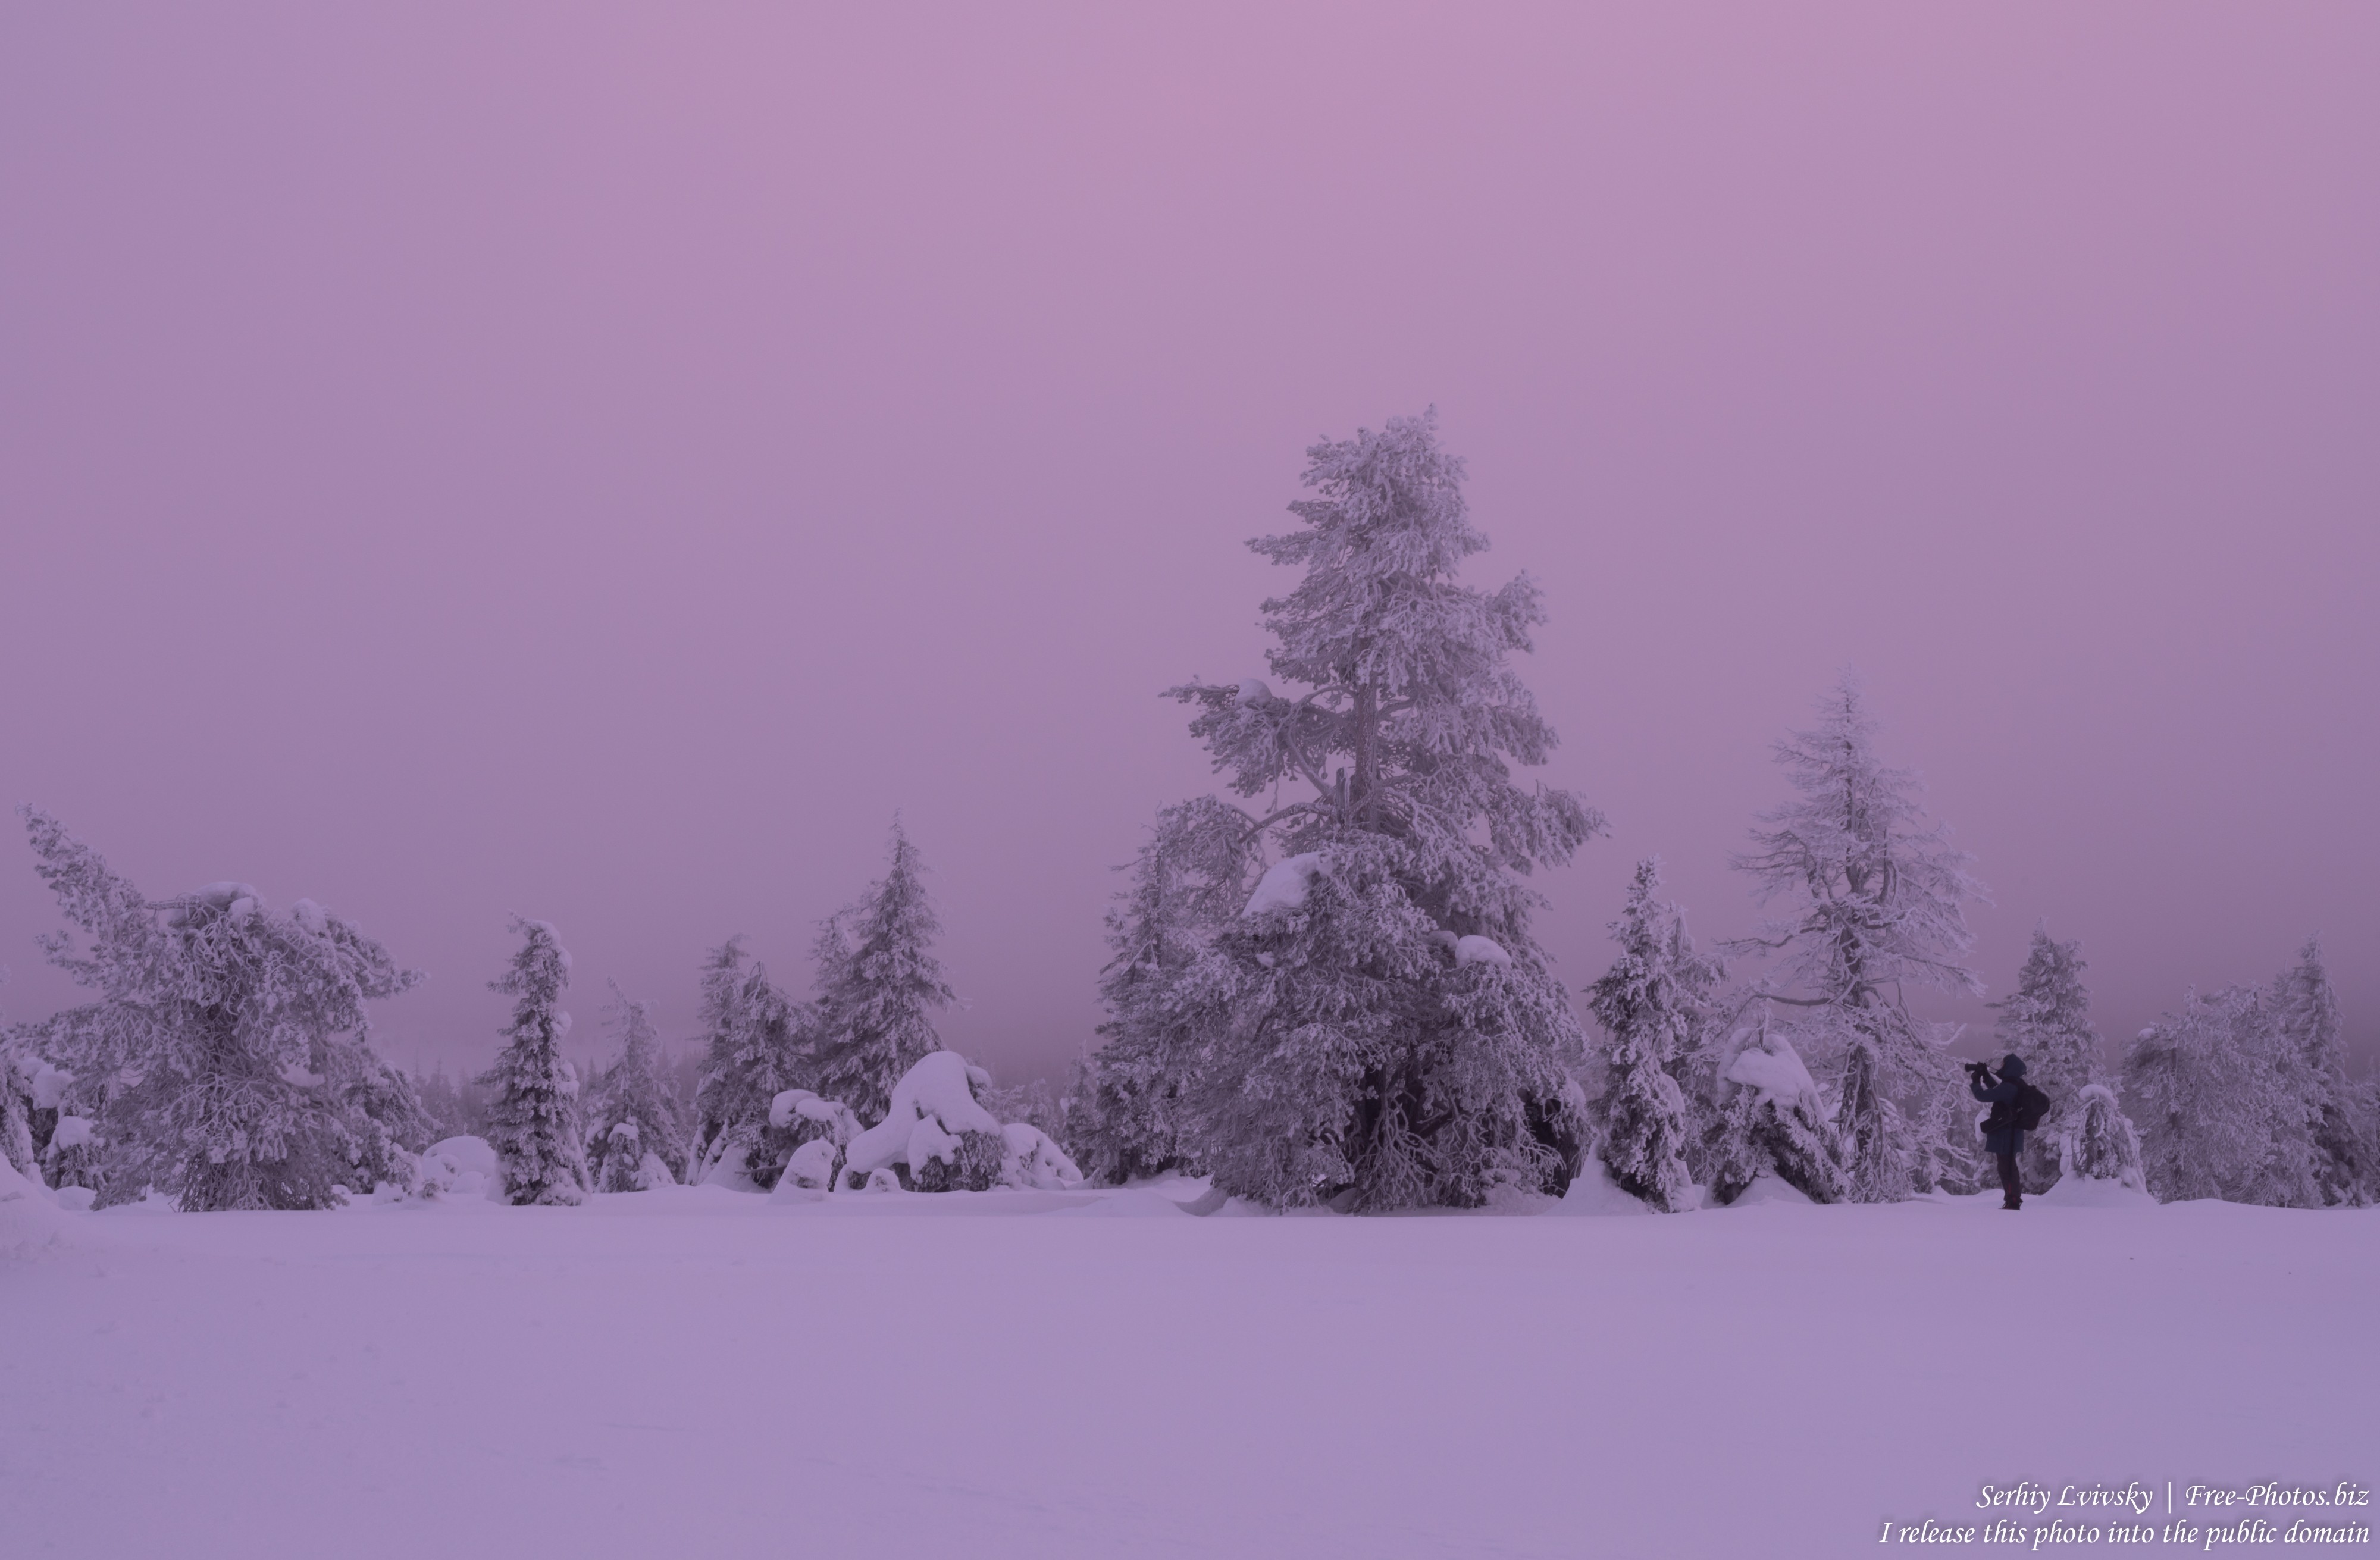 Riisitunturi, Finland, photographed in January 2020 by Serhiy Lvivsky, picture 11